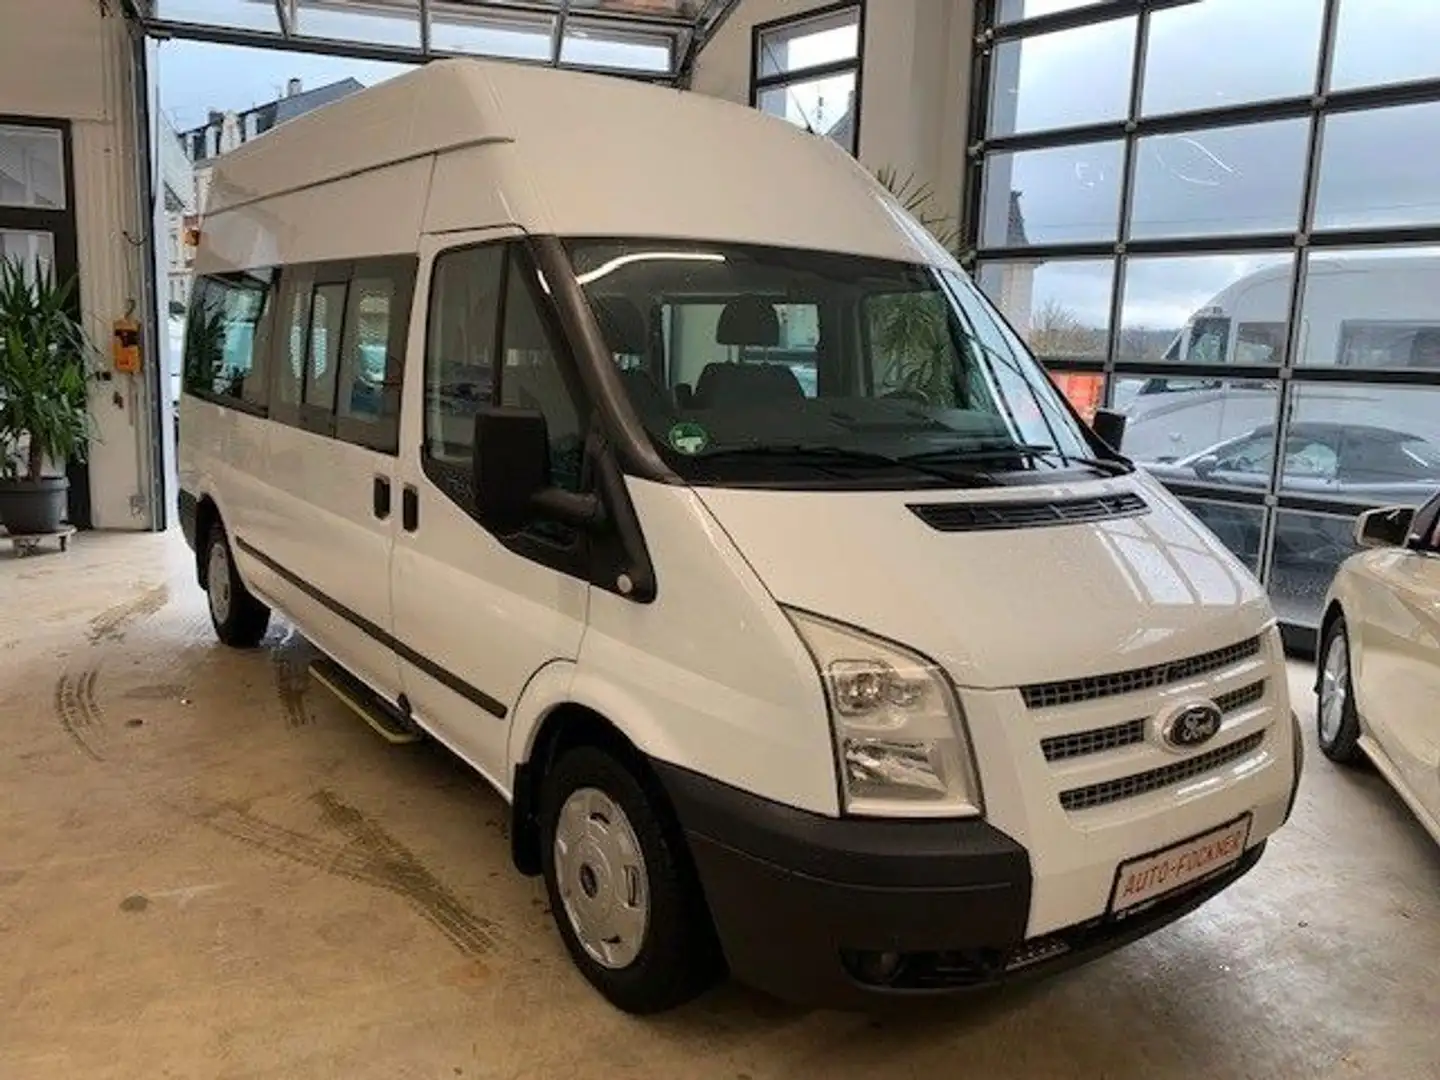 Ford Transit 2.2 TDCi extrahoch lang Lift Systemboden Biały - 1